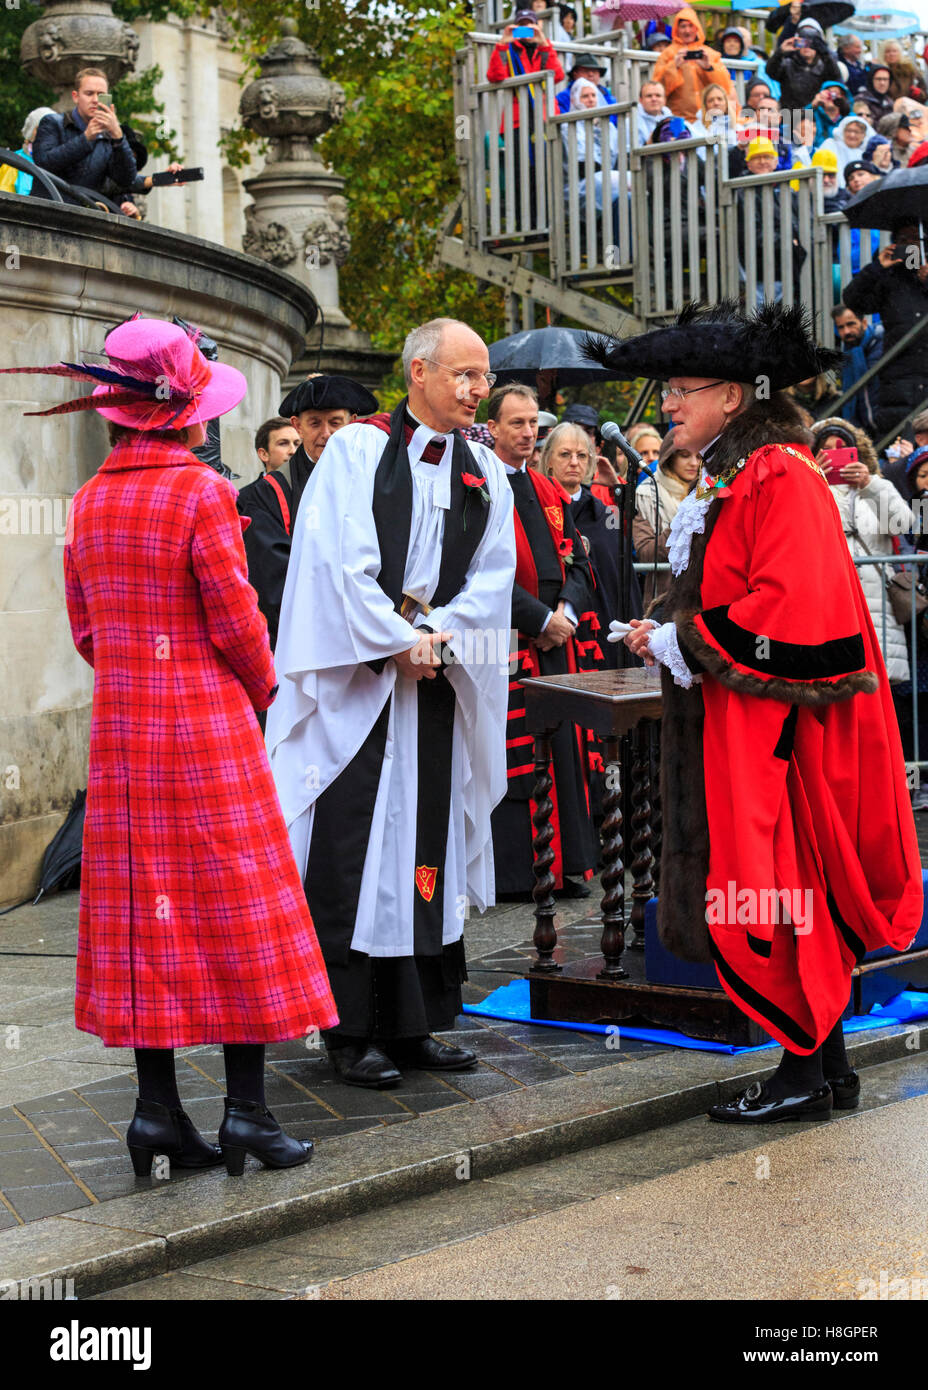 City of London, UK, 12th November 2016. The new Lord Mayor of the City of London, Andrew Parmley, and the Lady Mayoress, receive their blessing at St Paul's Cathedral during the Lord Mayor's Show 2016, which features over 7,000 participants, 150 horses, bands, vehicles and carriages. Credit:  Imageplotter News and Sports/Alamy Live News Stock Photo